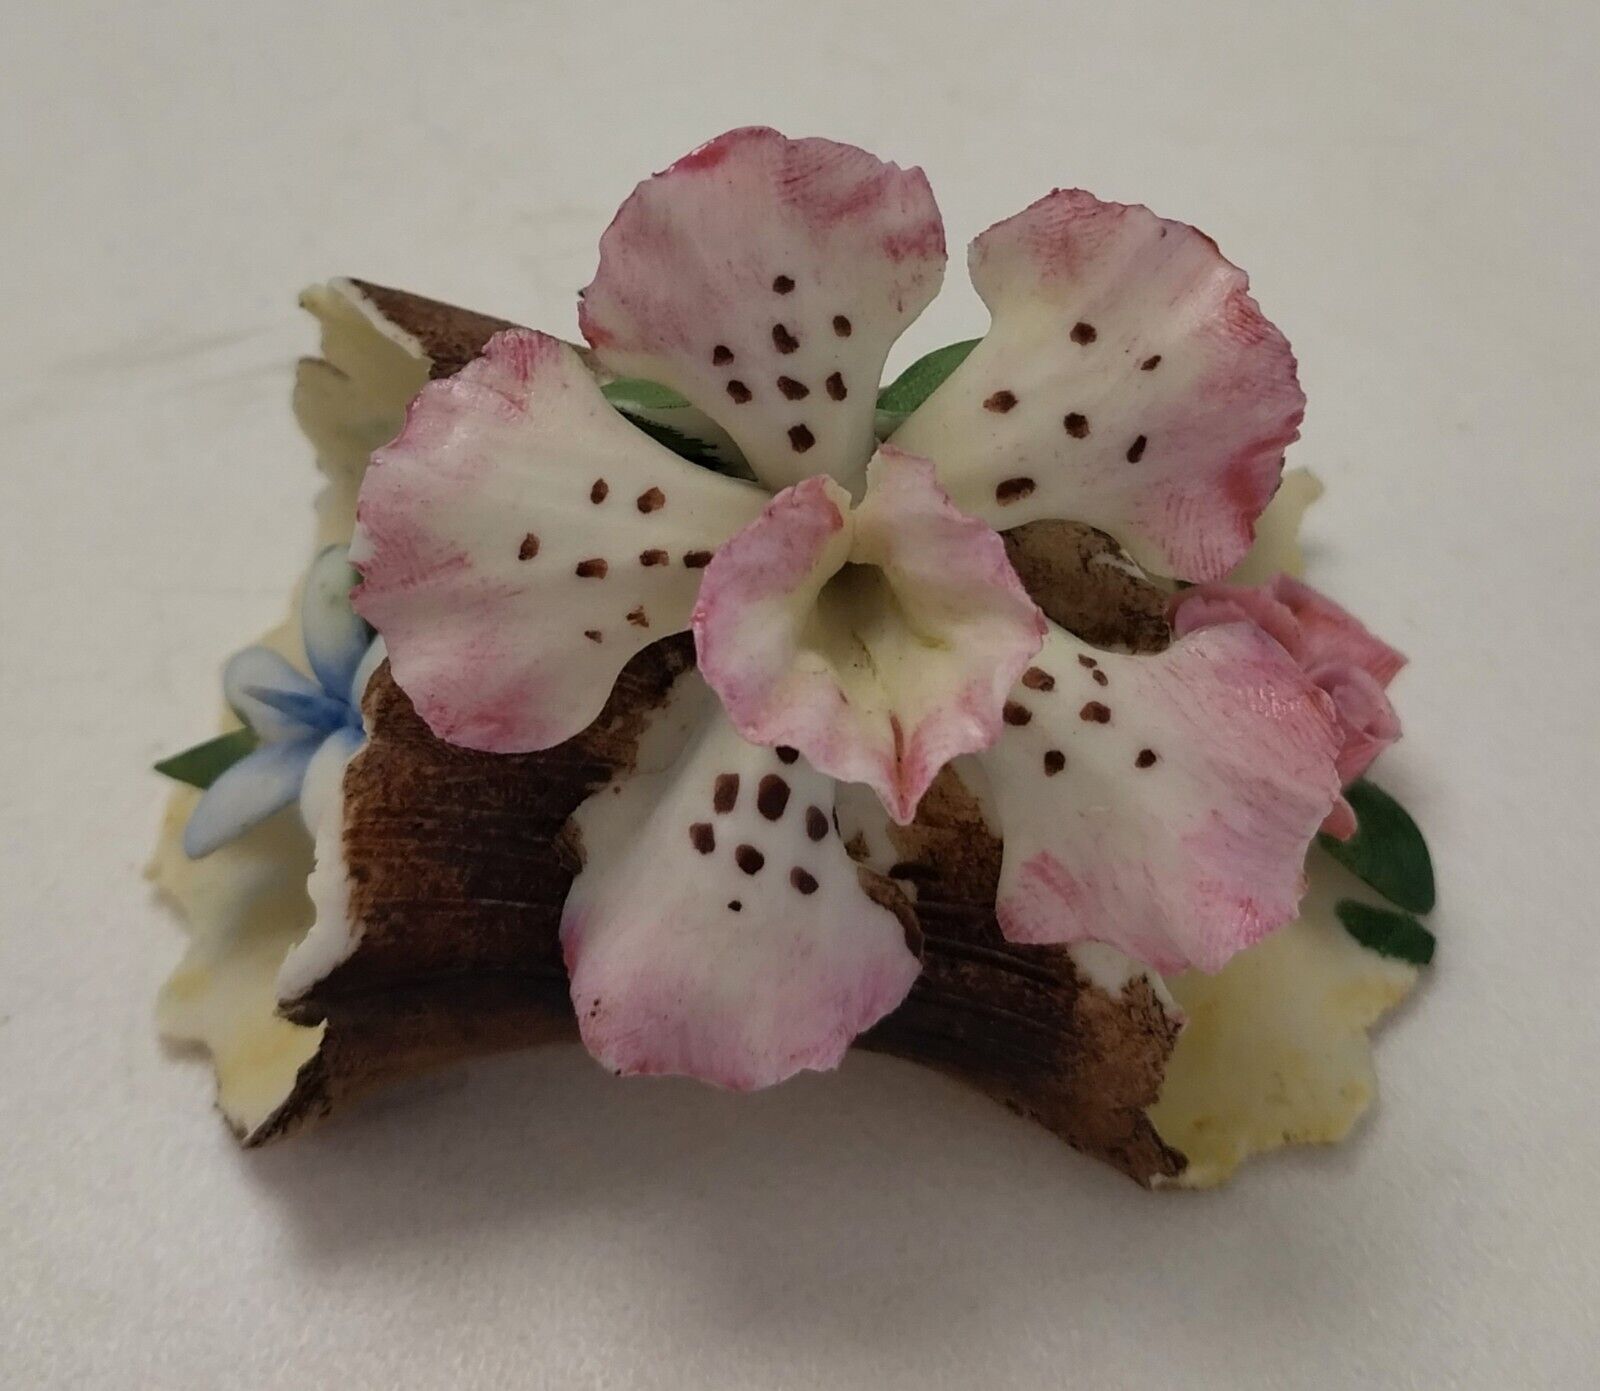 Vintage Capodimonte Handcrafted Porcelain Flowers on a Log Made In Italy